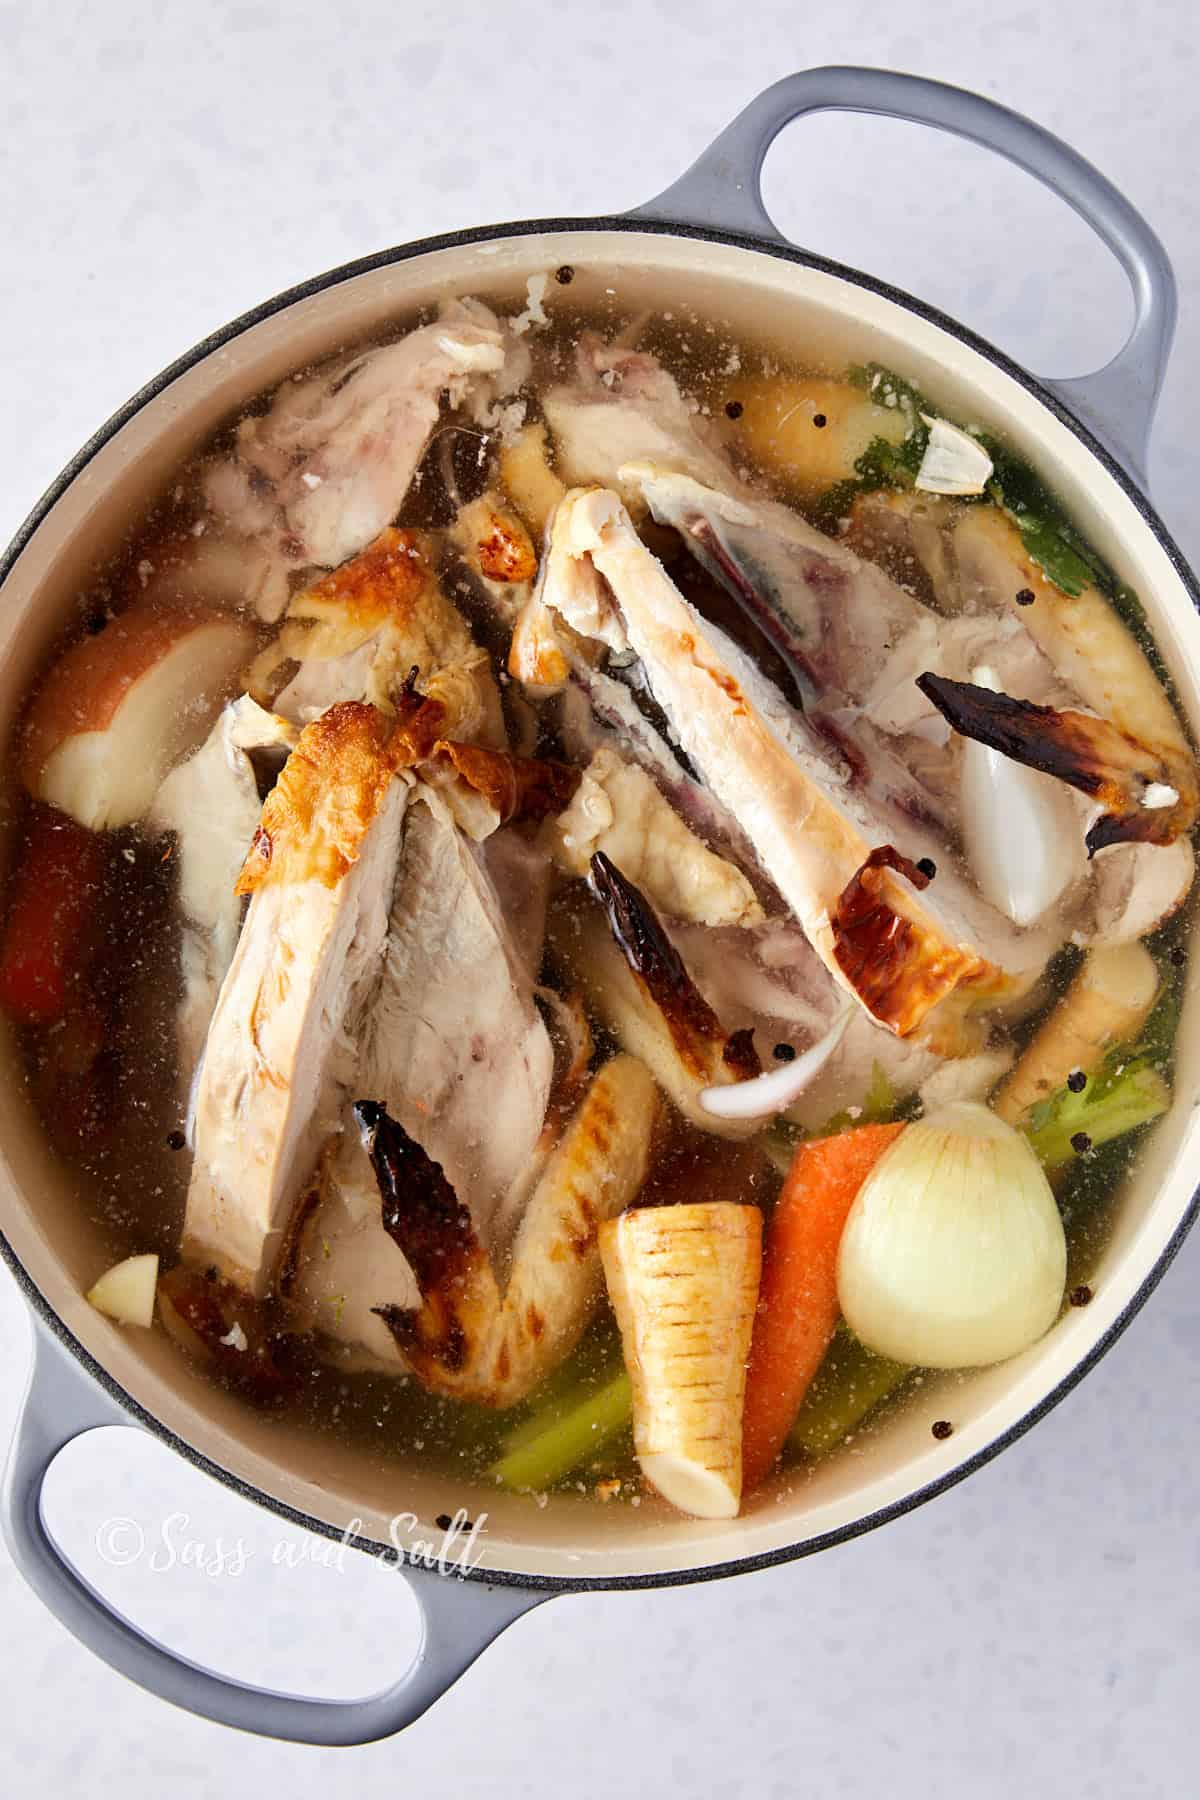 Overhead view of a pot containing a chicken carcass, carrots, onions, and celery submerged in water, the beginnings of a chicken bone broth. The pot is on a light surface, and the text "Sass and Salt" is subtly overlaid at